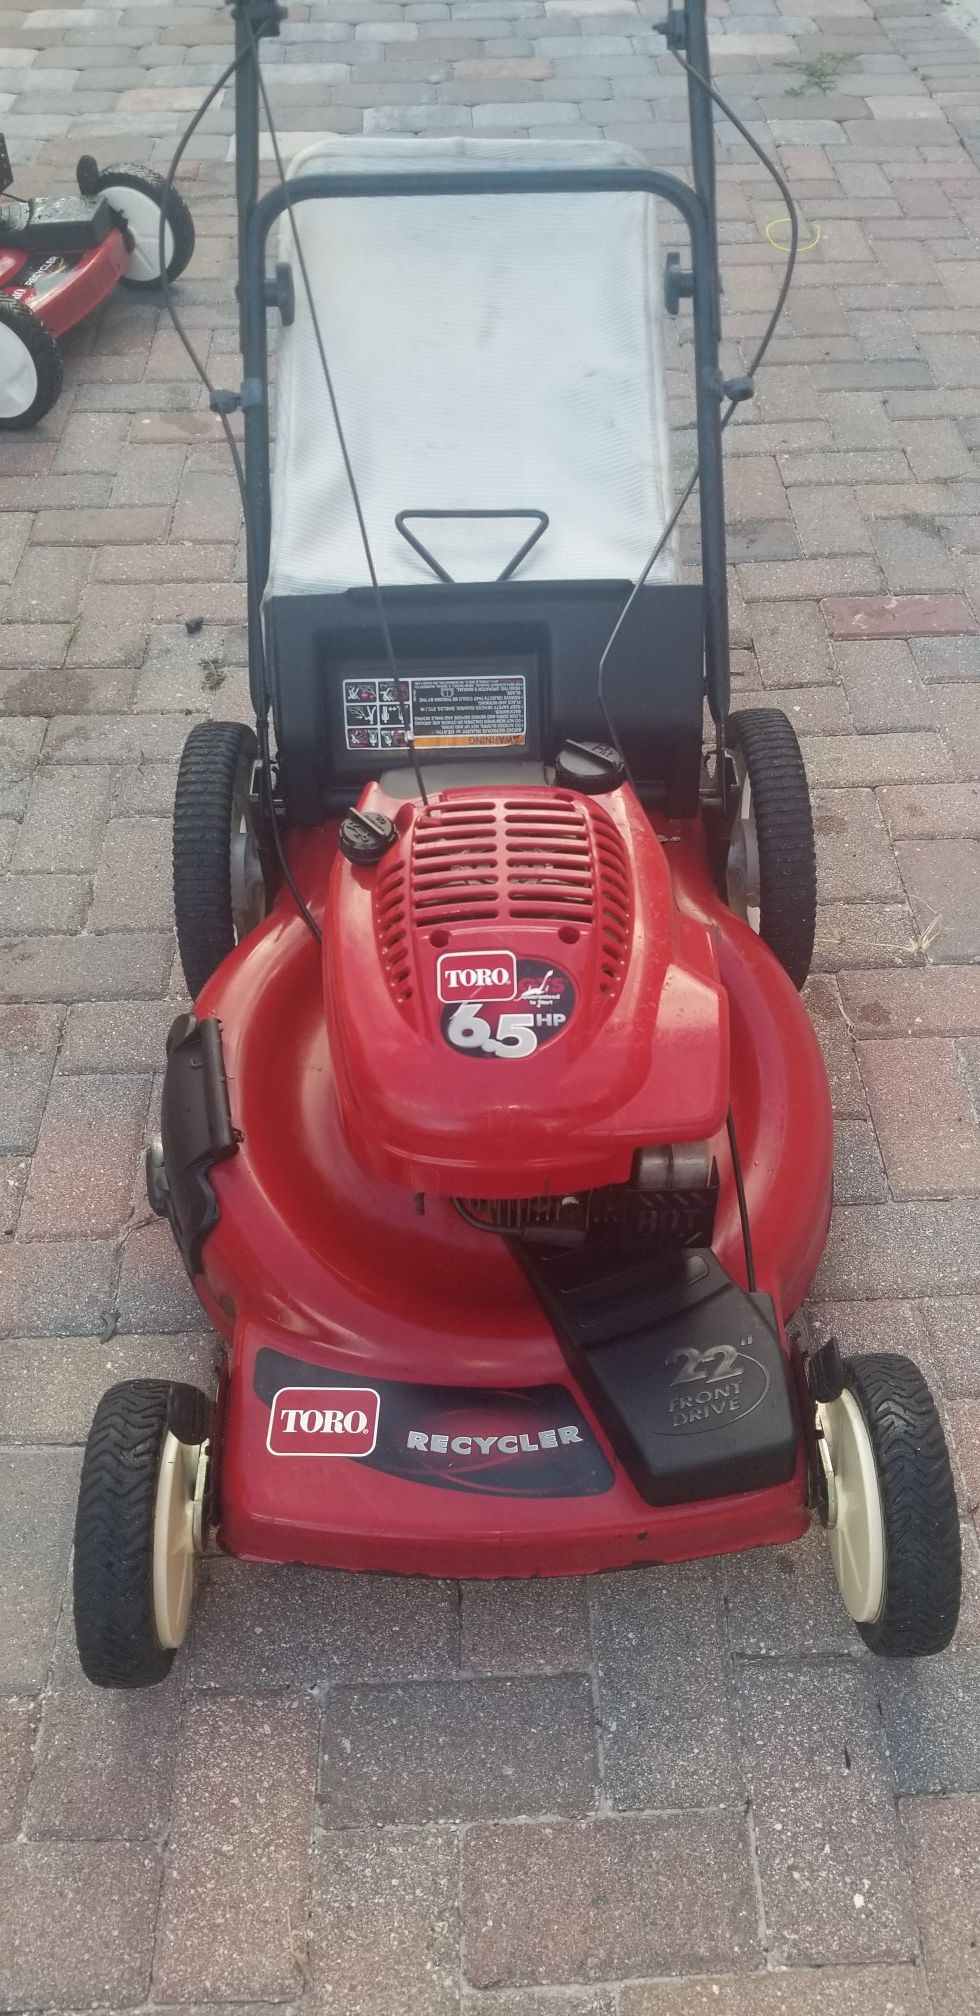 Toro lawn mower self propell in great conditions runs great